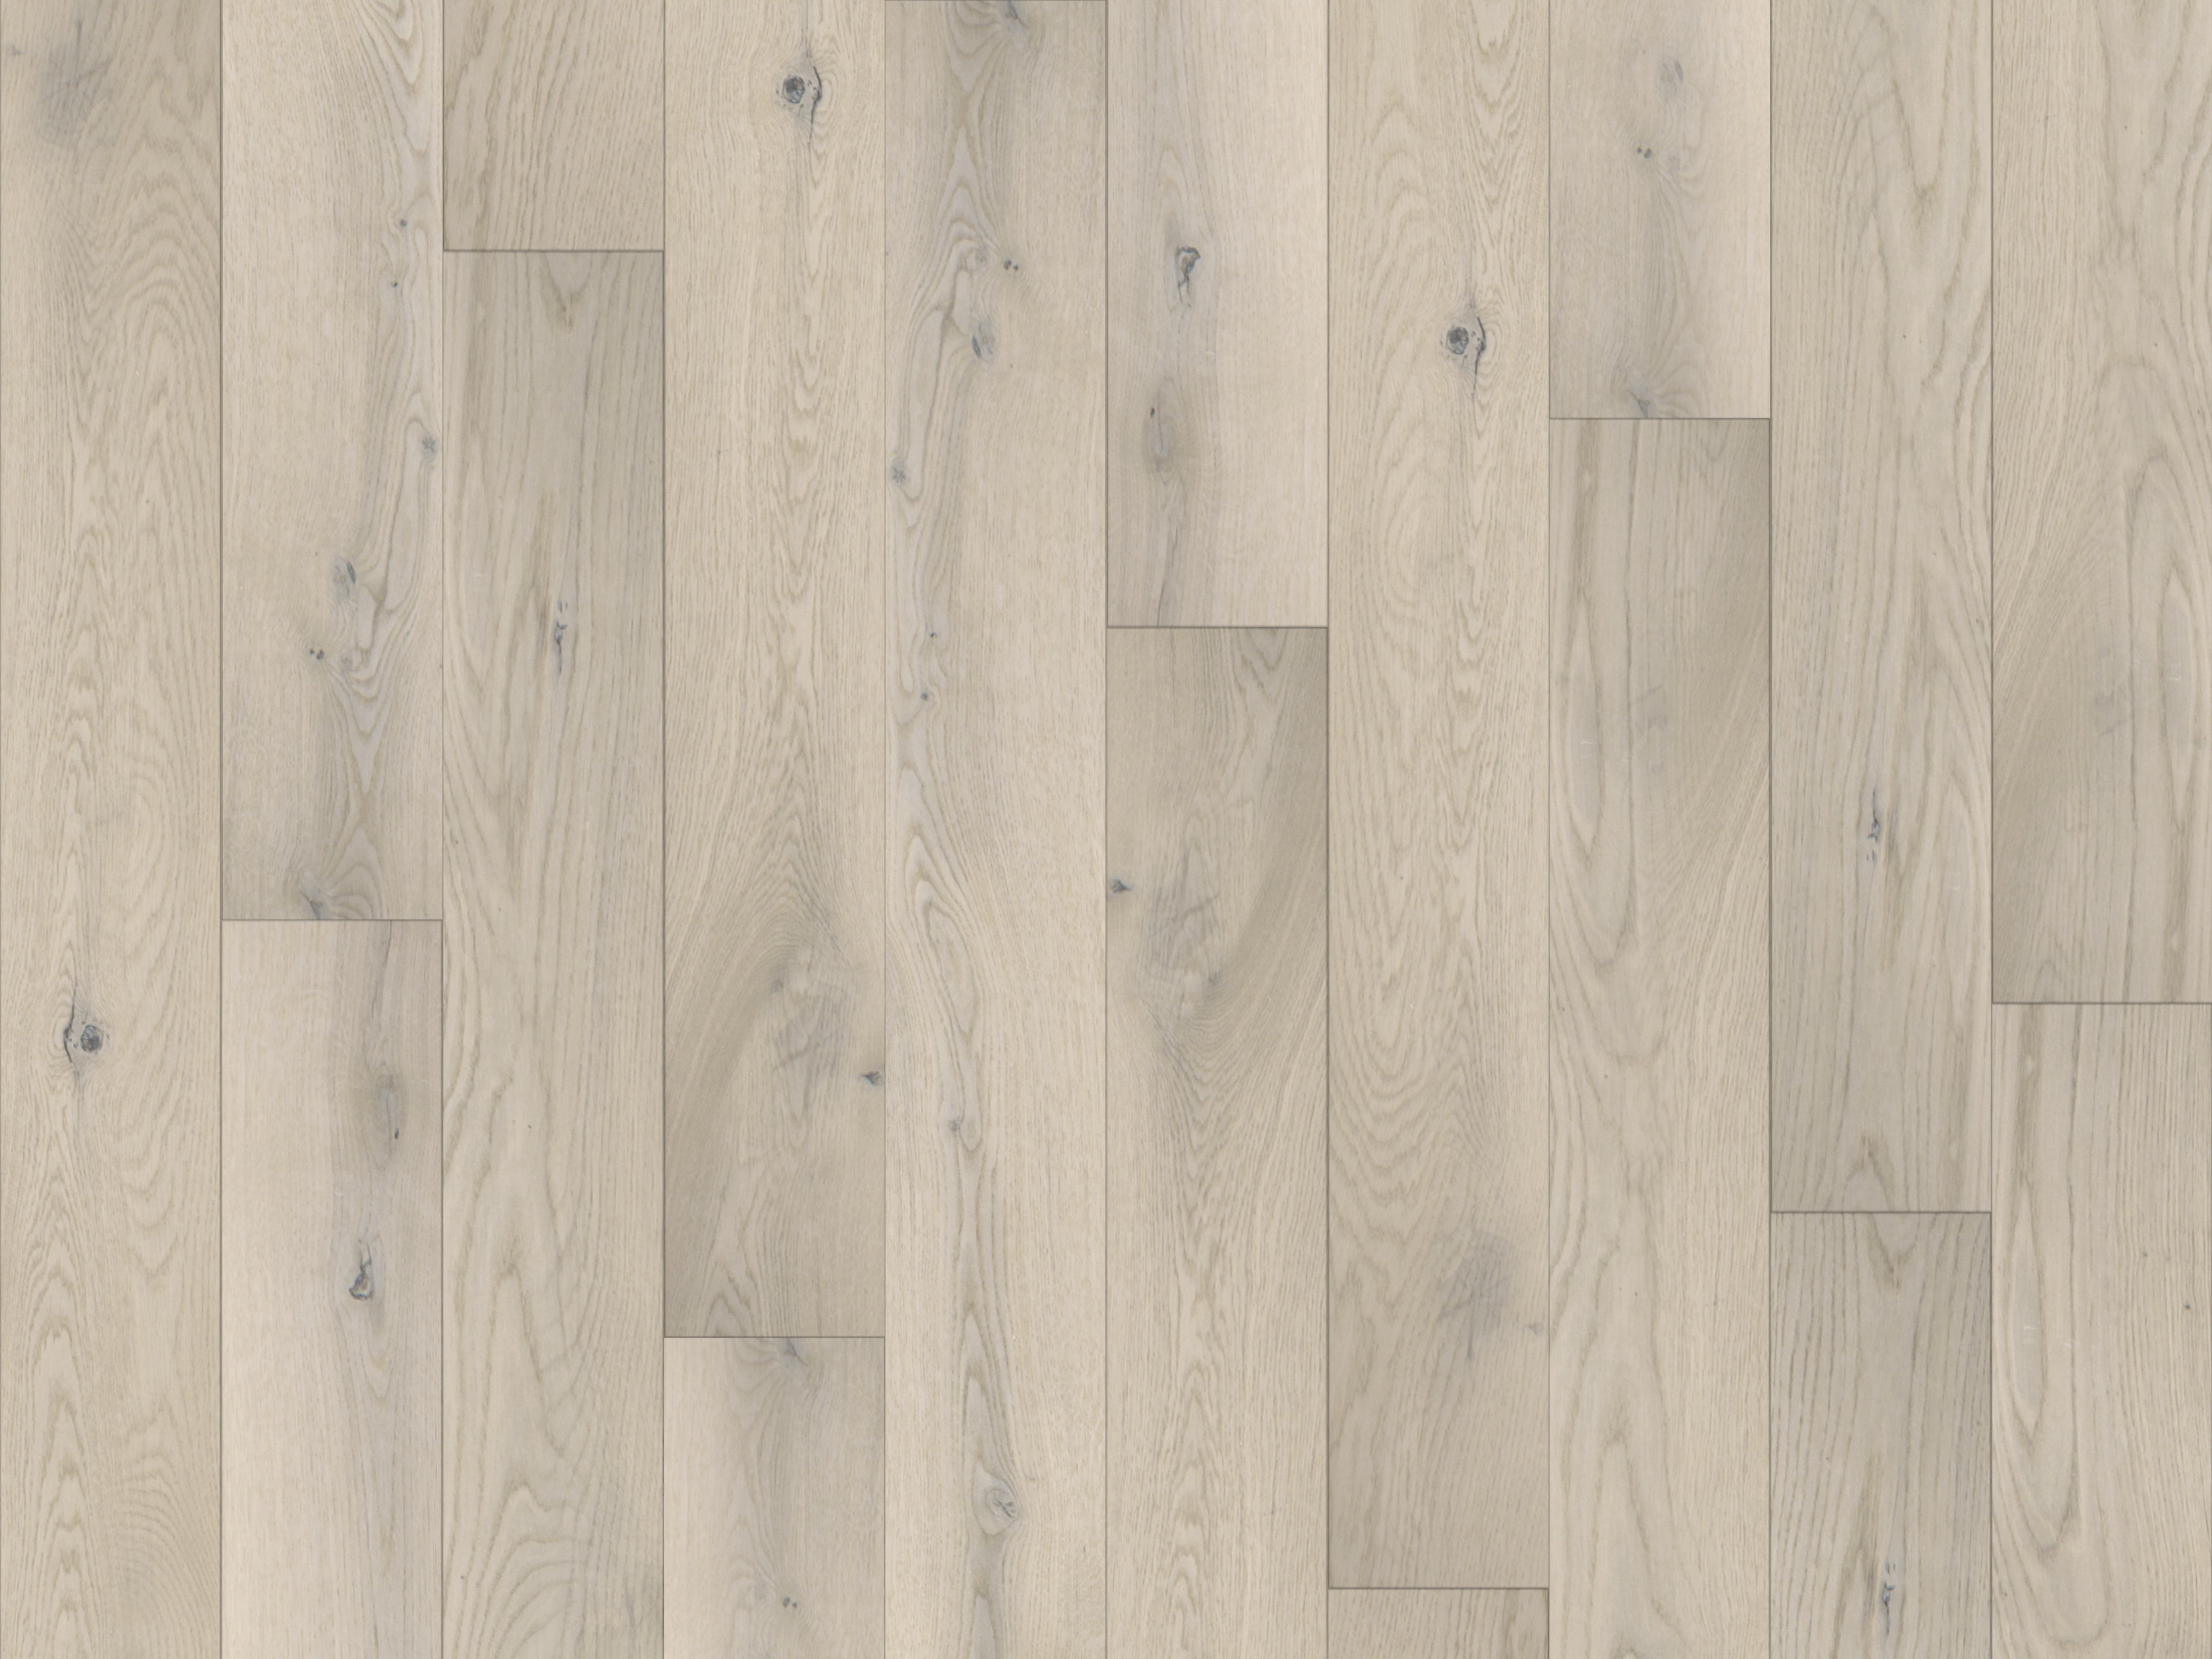 duchateau signature chateau white patina european oak engineered hardnatural wood floor uv oil finish for interior use distributed by surface group international